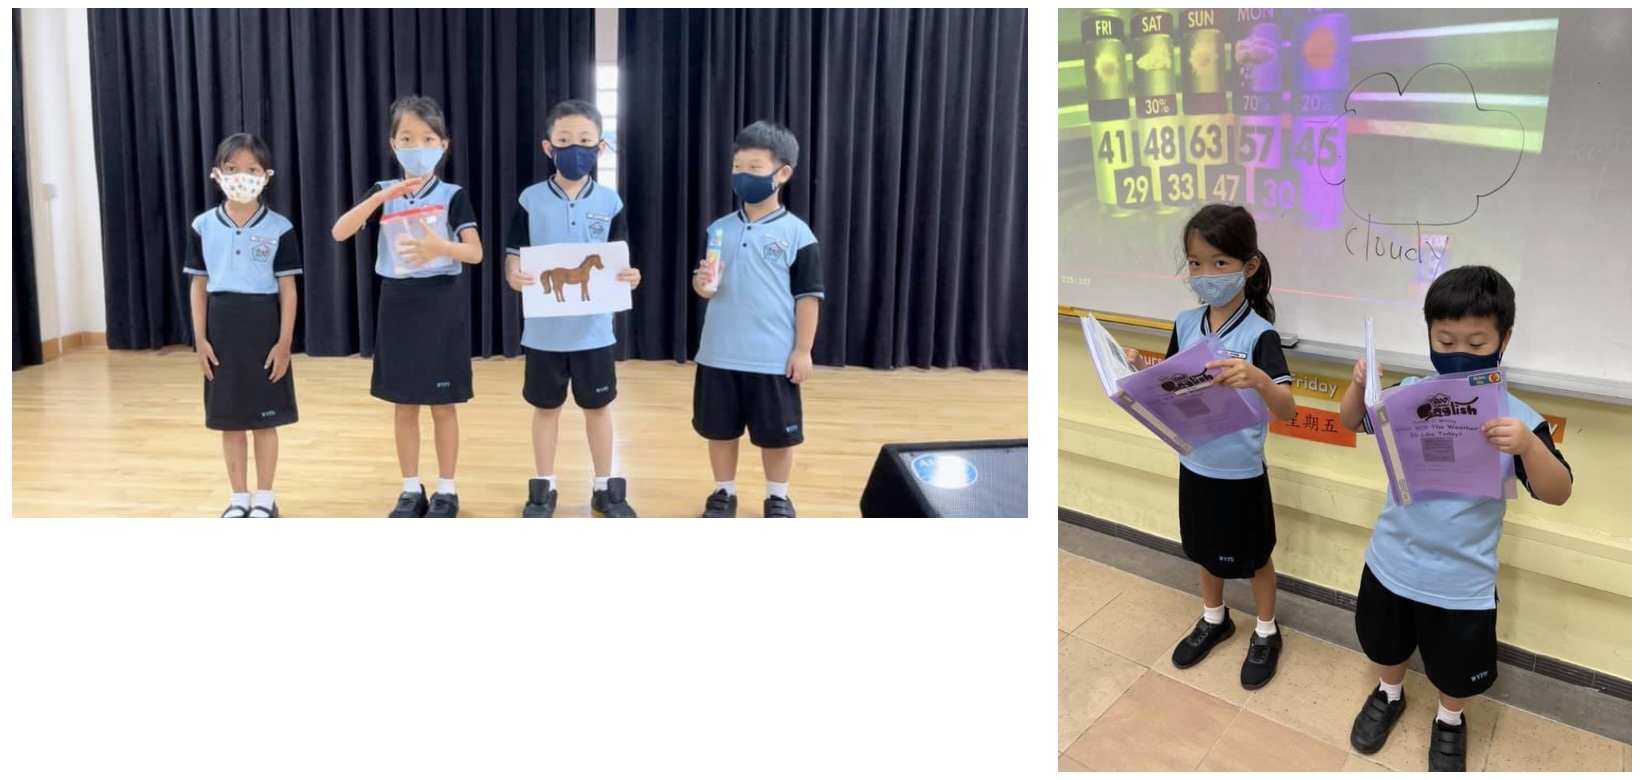 Lower Primary pupils presenting during a shared experience